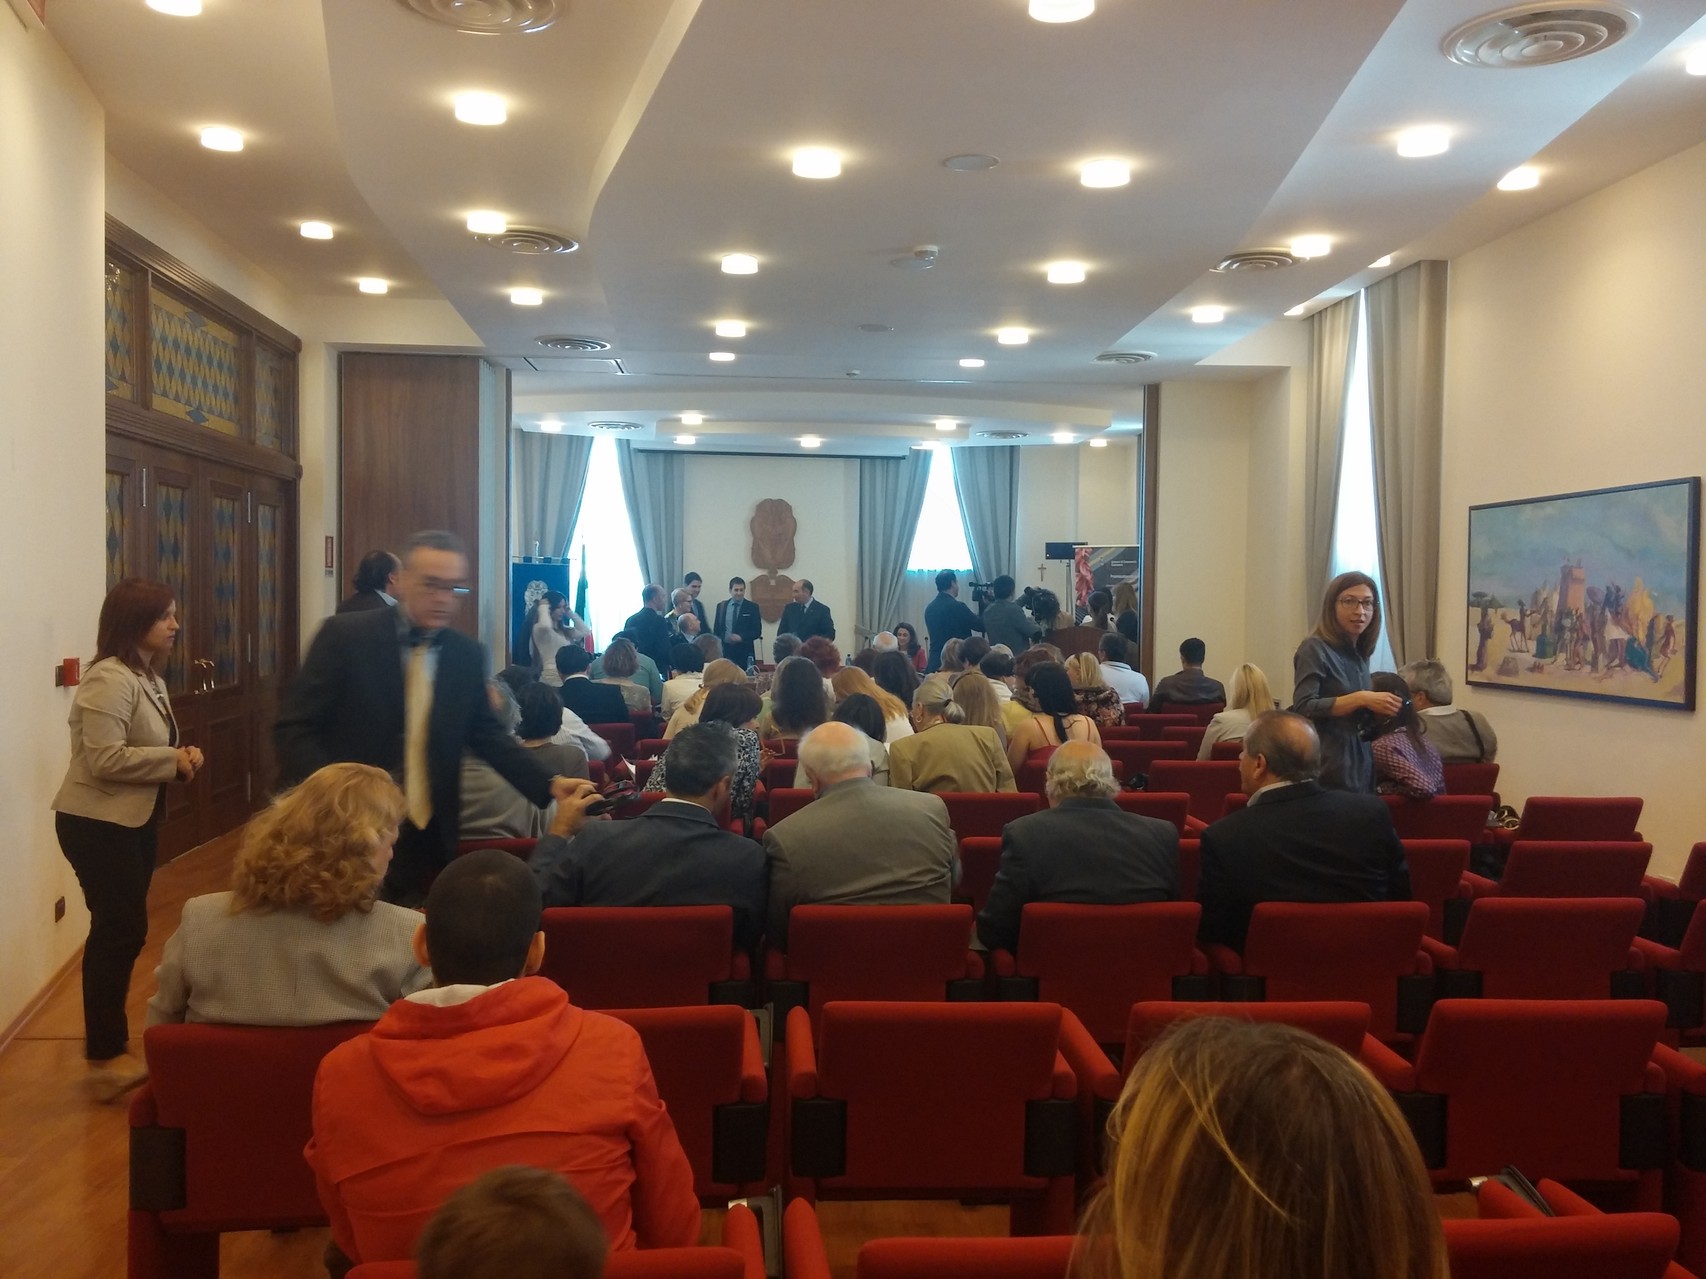 RU <>IT Simult. Interpreting at a Press Conference for "Incoming Russia" event at the Catanzaro Chamber of Commerce 31 May 2014